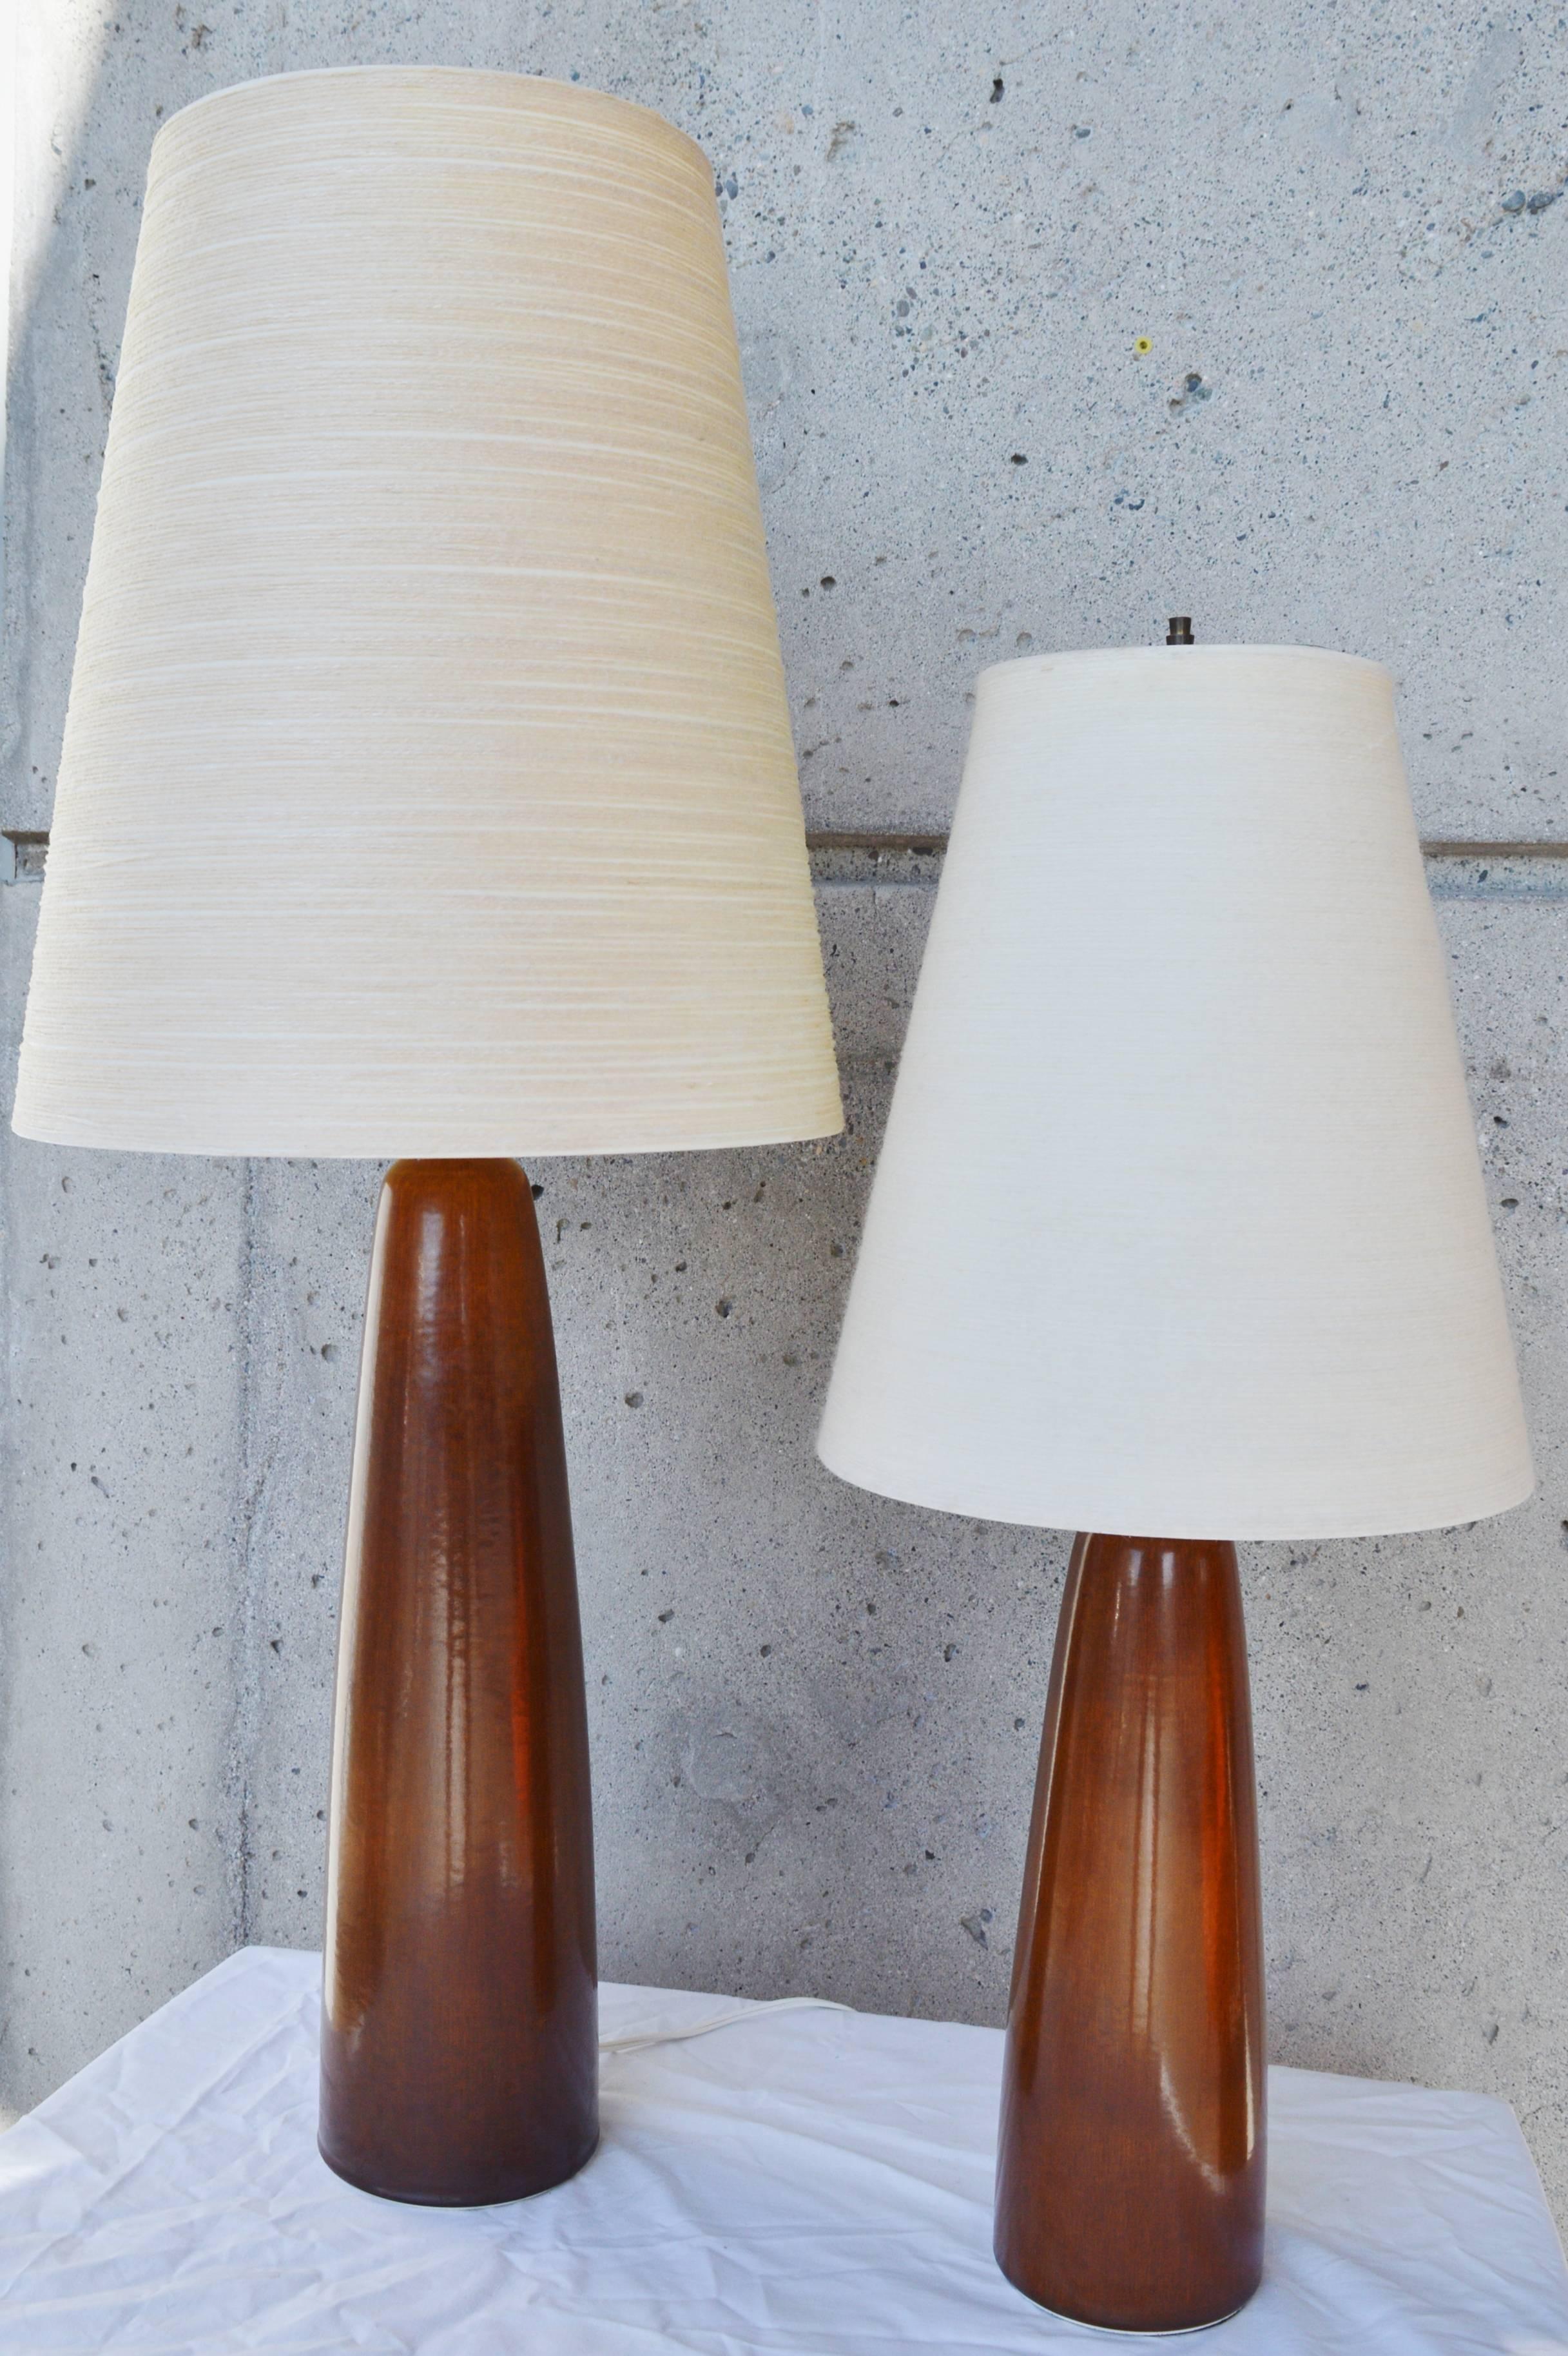 Pair of Lotte & Gunnar Bostlund Ceramic Lamps with Original Shades and Finials 2